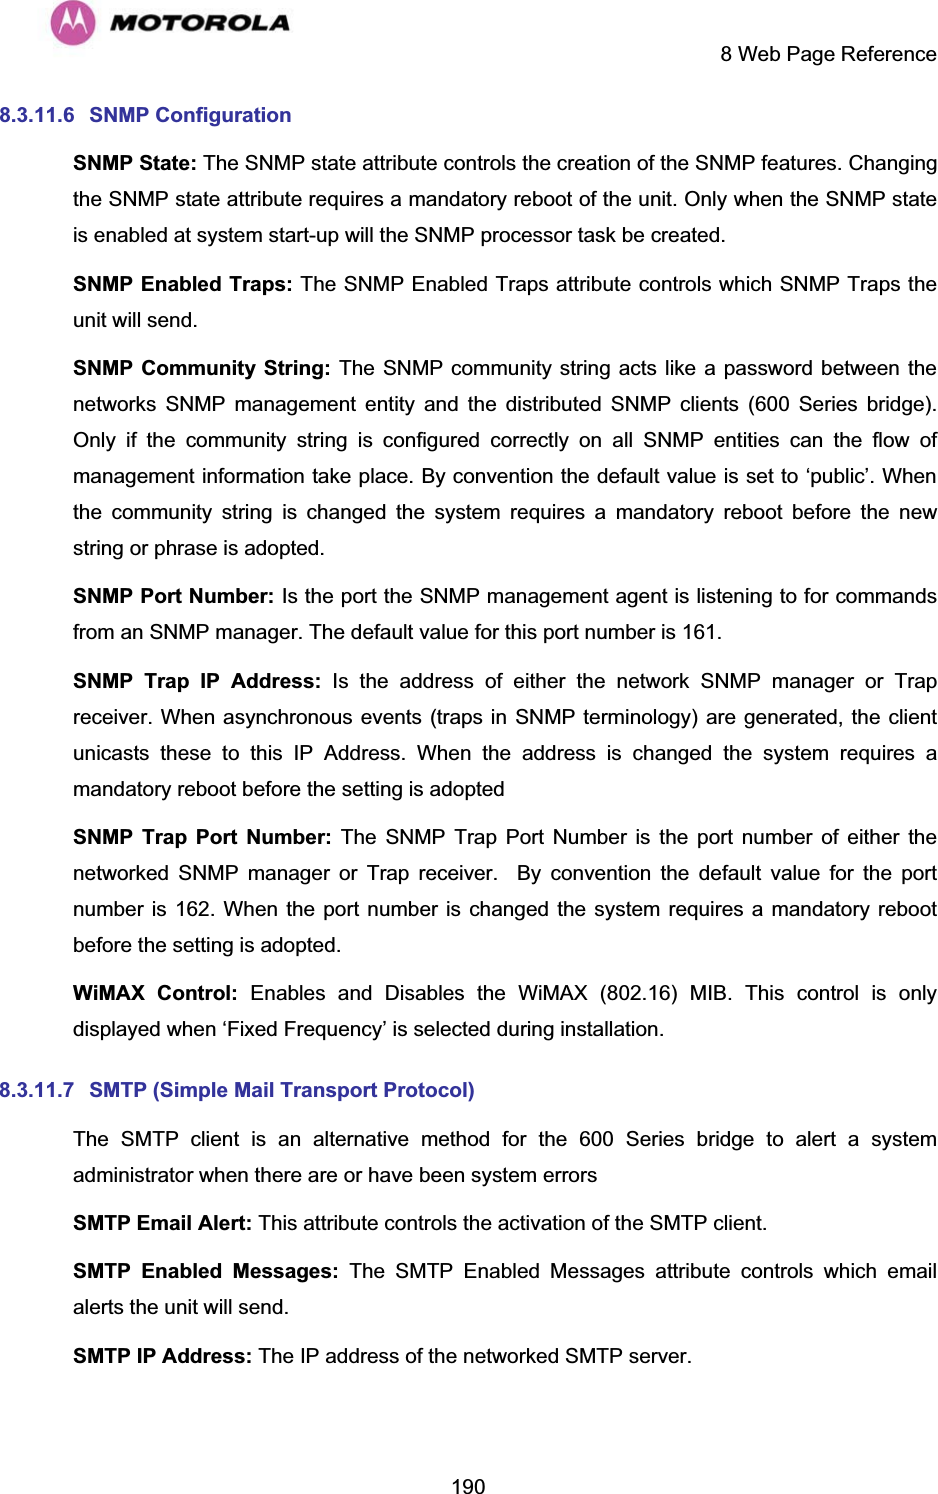     8 Web Page Reference  1908.3.11.6 SNMP Configuration SNMP State: The SNMP state attribute controls the creation of the SNMP features. Changing the SNMP state attribute requires a mandatory reboot of the unit. Only when the SNMP state is enabled at system start-up will the SNMP processor task be created. SNMP Enabled Traps: The SNMP Enabled Traps attribute controls which SNMP Traps the unit will send. SNMP Community String: The SNMP community string acts like a password between the networks SNMP management entity and the distributed SNMP clients (600 Series bridge). Only if the community string is configured correctly on all SNMP entities can the flow of management information take place. By convention the default value is set to ‘public’. When the community string is changed the system requires a mandatory reboot before the new string or phrase is adopted. SNMP Port Number: Is the port the SNMP management agent is listening to for commands from an SNMP manager. The default value for this port number is 161. SNMP Trap IP Address: Is the address of either the network SNMP manager or Trap receiver. When asynchronous events (traps in SNMP terminology) are generated, the client unicasts these to this IP Address. When the address is changed the system requires a mandatory reboot before the setting is adopted SNMP Trap Port Number: The SNMP Trap Port Number is the port number of either the networked SNMP manager or Trap receiver.  By convention the default value for the port number is 162. When the port number is changed the system requires a mandatory reboot before the setting is adopted. WiMAX Control: Enables and Disables the WiMAX (802.16) MIB. This control is only displayed when ‘Fixed Frequency’ is selected during installation. 8.3.11.7  SMTP (Simple Mail Transport Protocol) The SMTP client is an alternative method for the 600 Series bridge to alert a system administrator when there are or have been system errors SMTP Email Alert: This attribute controls the activation of the SMTP client. SMTP Enabled Messages: The SMTP Enabled Messages attribute controls which email alerts the unit will send. SMTP IP Address: The IP address of the networked SMTP server. 